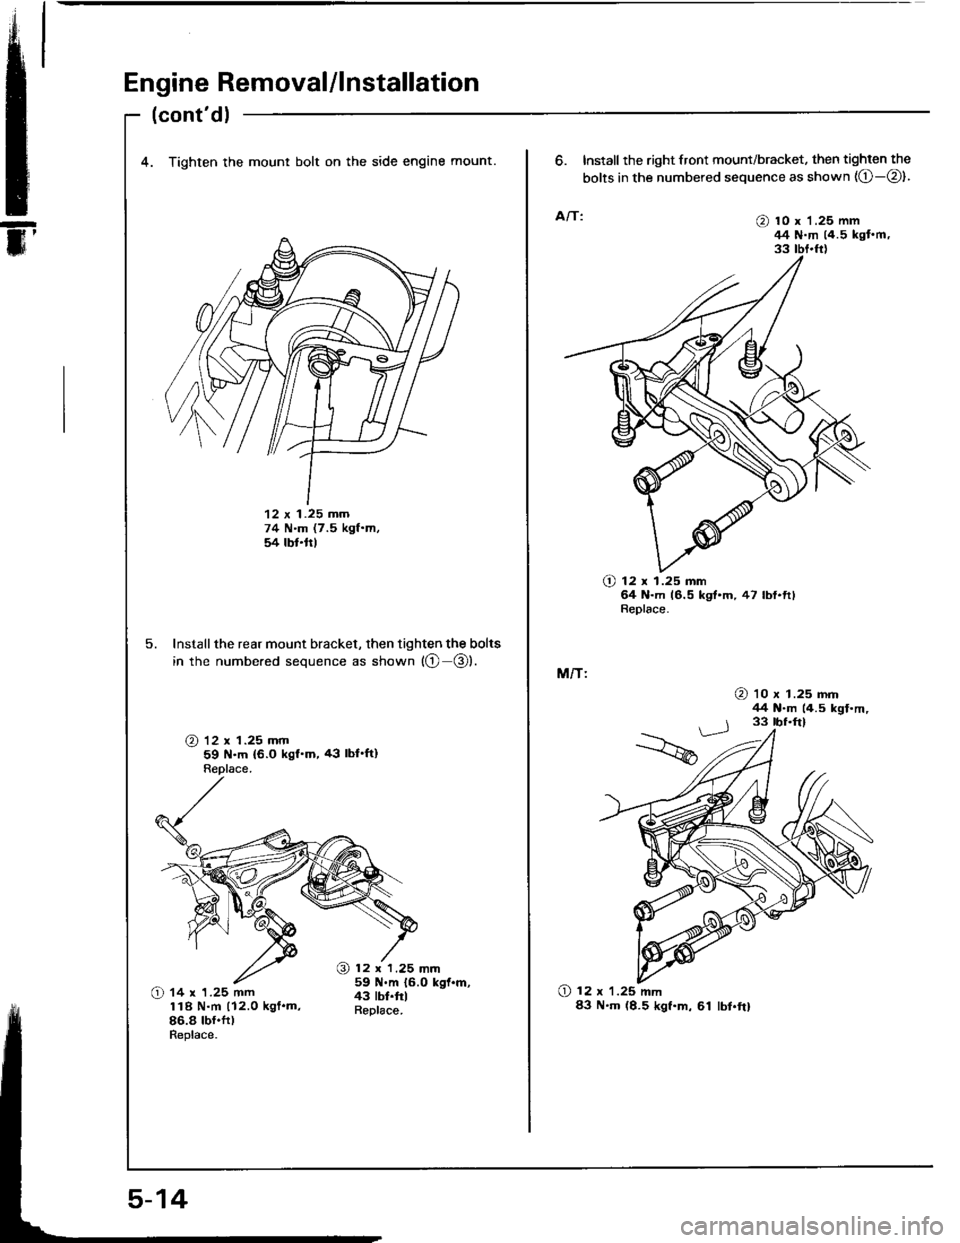 ACURA INTEGRA 1994  Service Repair Manual Engine Removal/lnstallation
.tE
m
(contdl
4. Tighten the mount bolt on the side engine mount.
12 x 1.25 mm74 N.m (7.5 kgf.m,54 lbt.ttl
5. Install the rear mount bracket, then tighten the bolts
in th